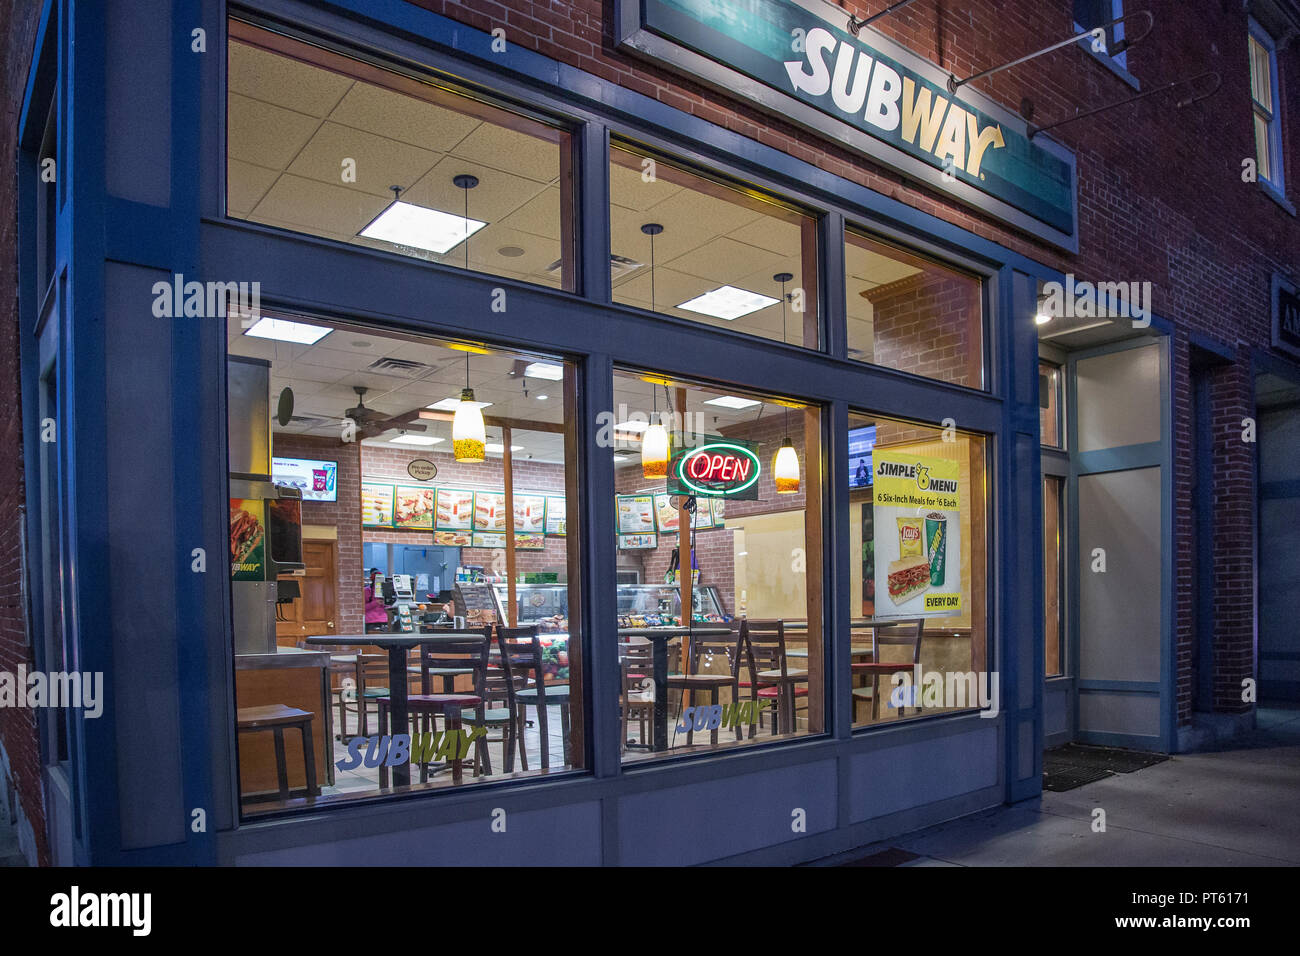 The Subway restaurant on Main Street in Amherst, MA Stock Photo